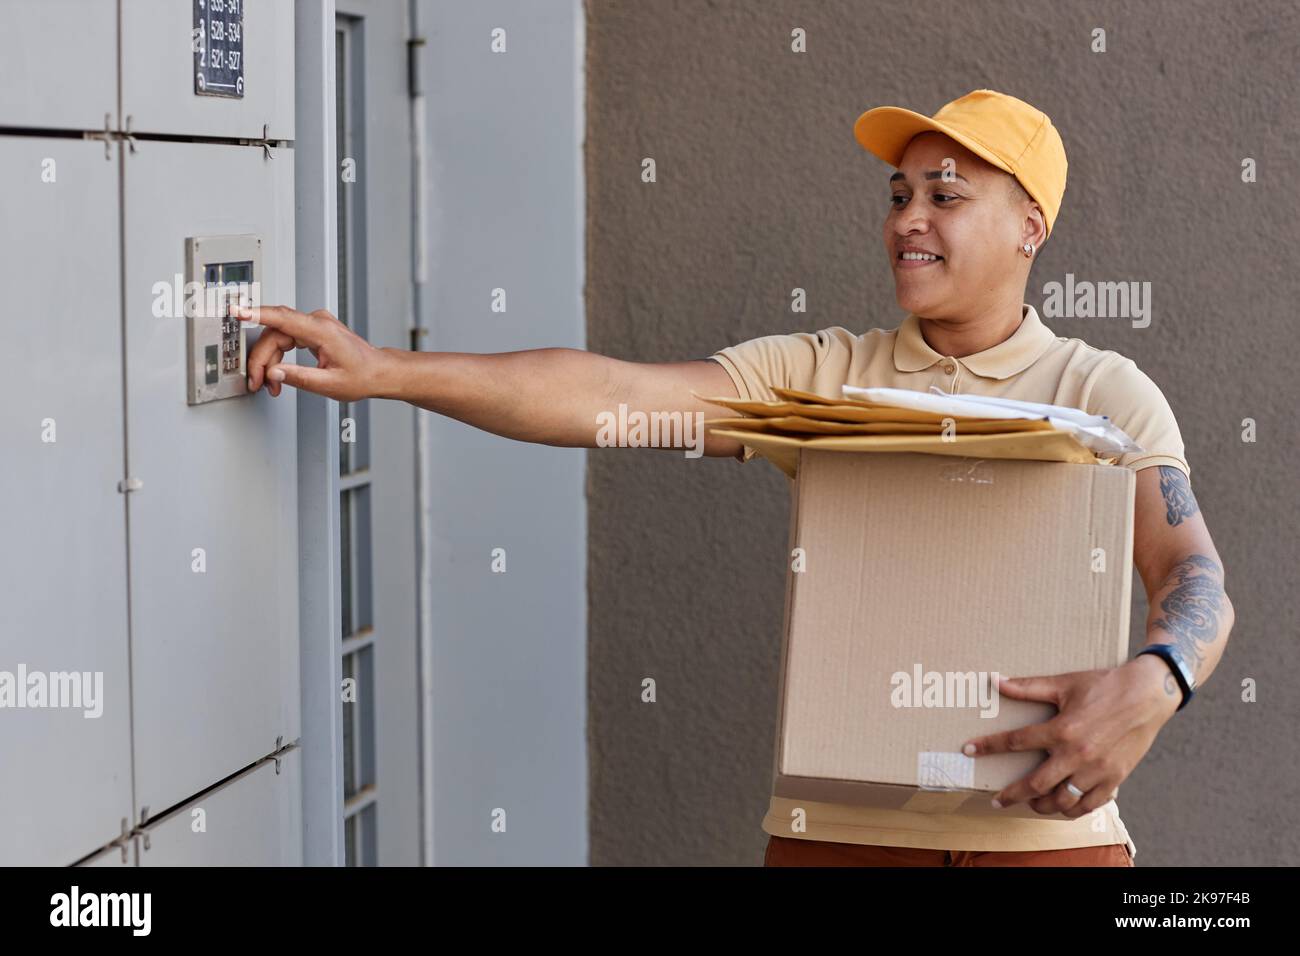 Side view portrait of female delivery worker ringing doorbell and holding box Stock Photo